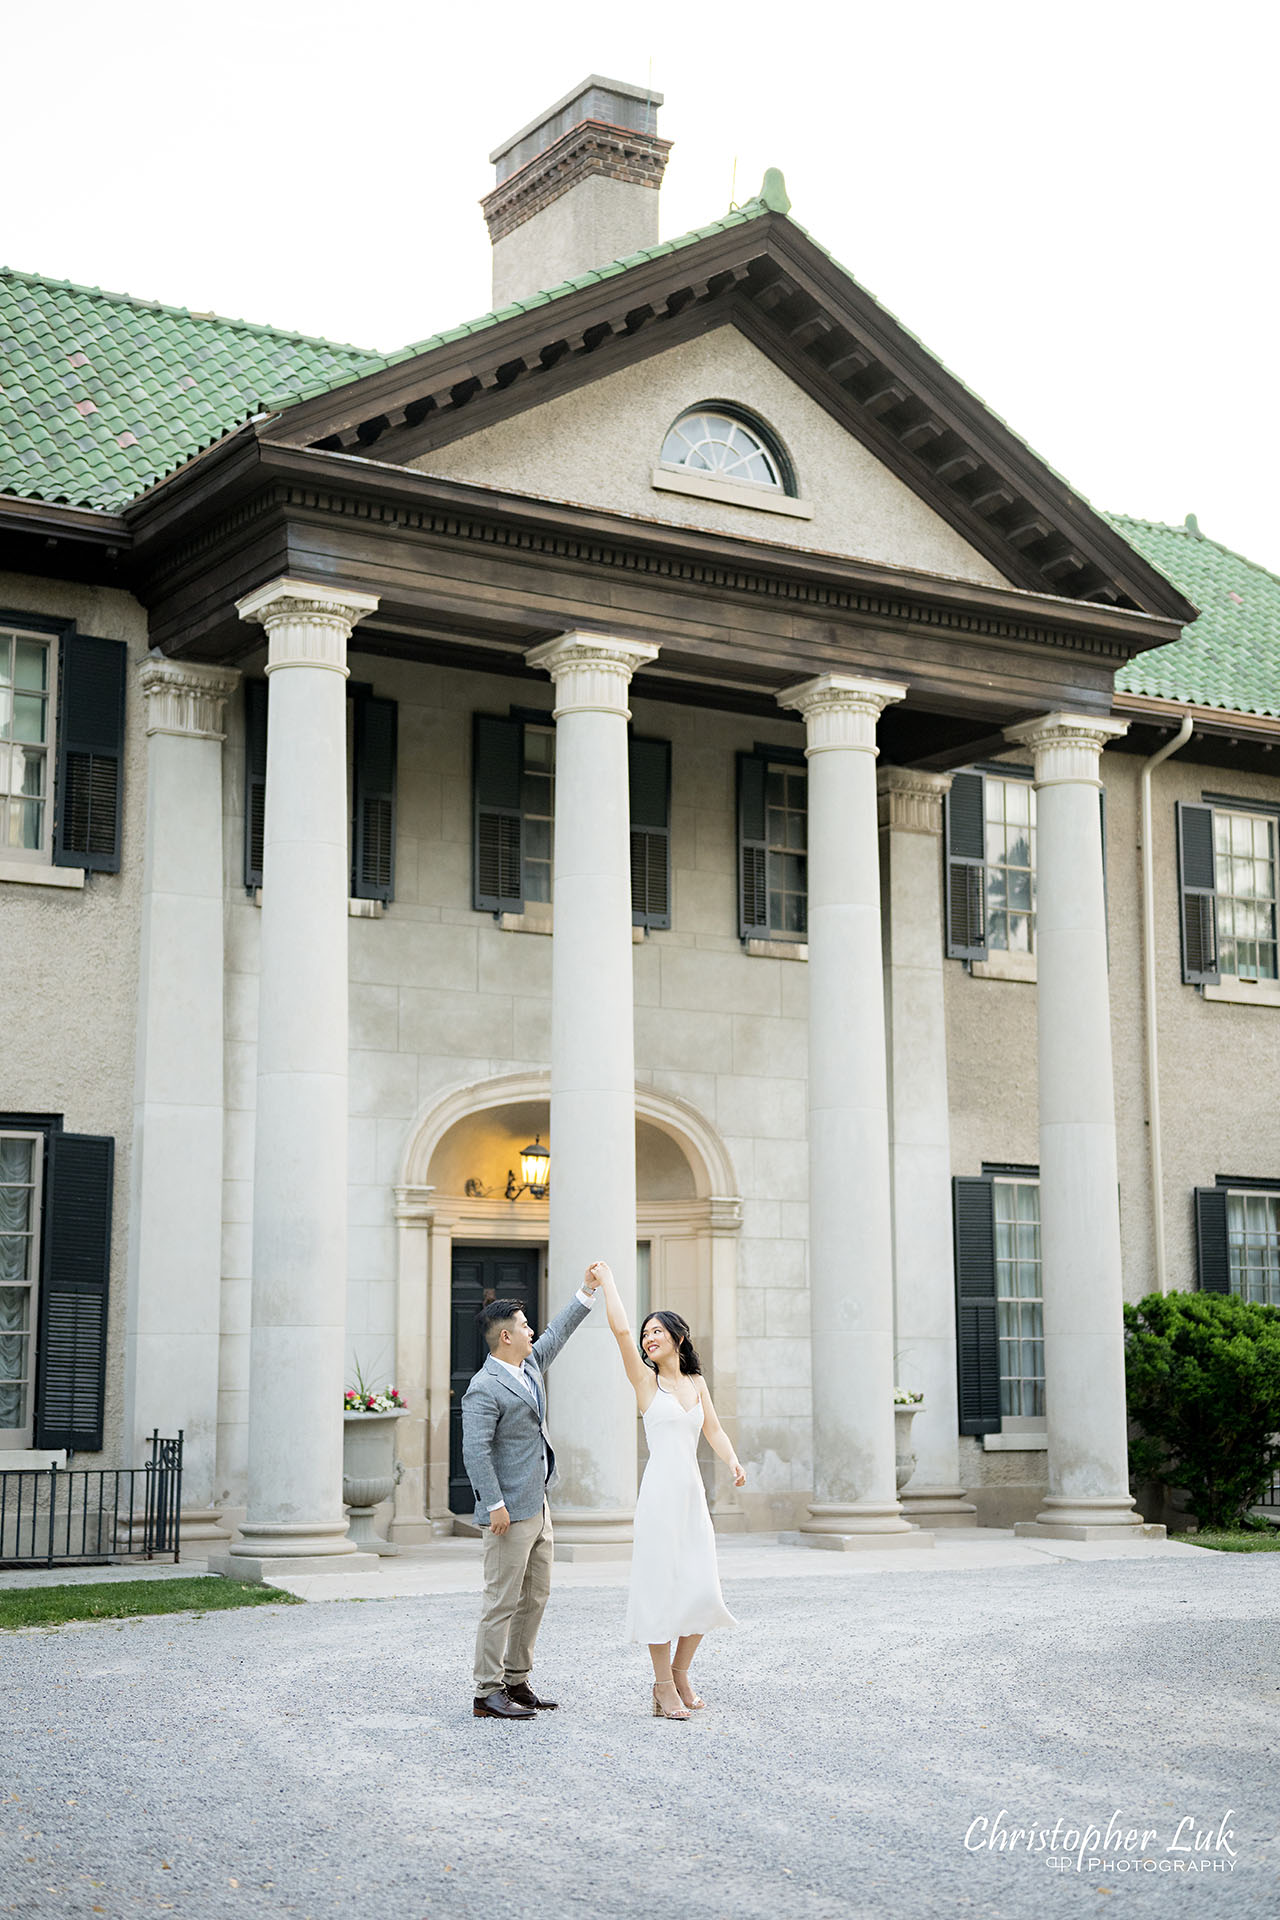 Parkwood Estate Bride Groom Engagement Session Main Mansion Entrance Facade Bride Groom Holding Hands Photojournalistic Candid Natural Organic Intimate Walking Together Portrait Smile Dancing Spinning Twirling Cute Adorable Fun